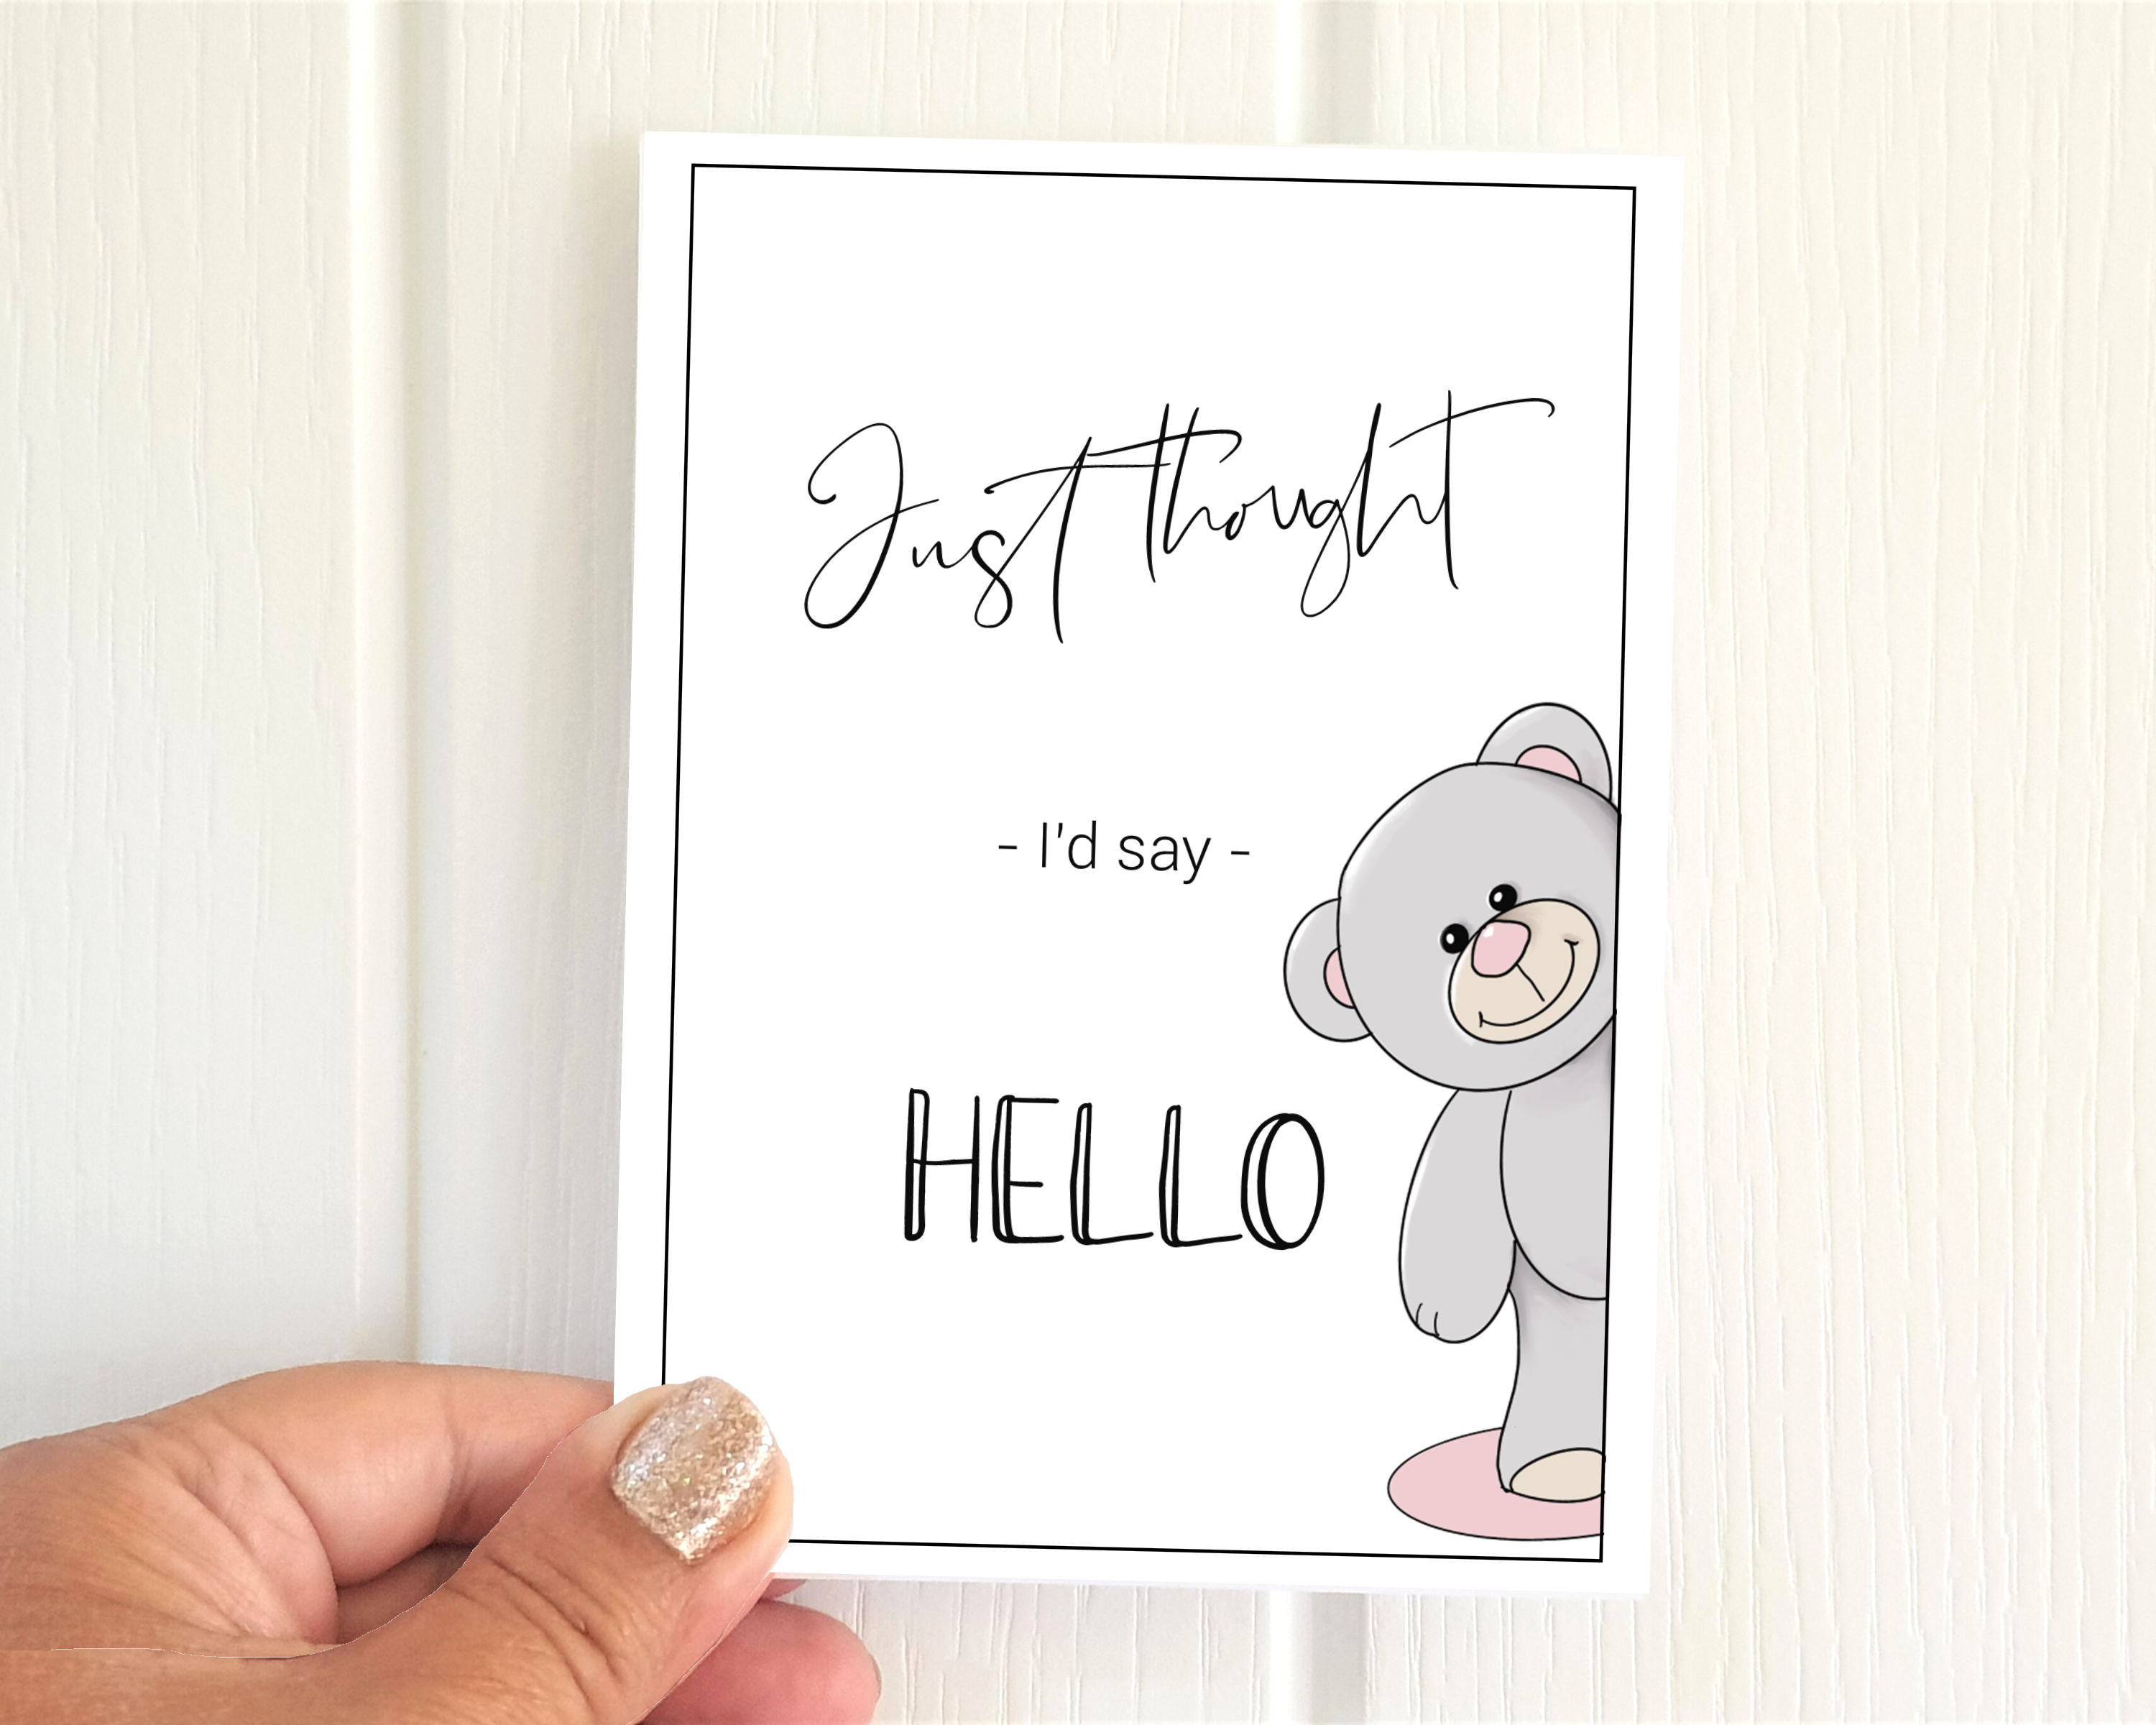 Grey bear illustration A6 'Just thought I'd say hello' pack of 6 Poppleberry positivity postcards, held to show size.